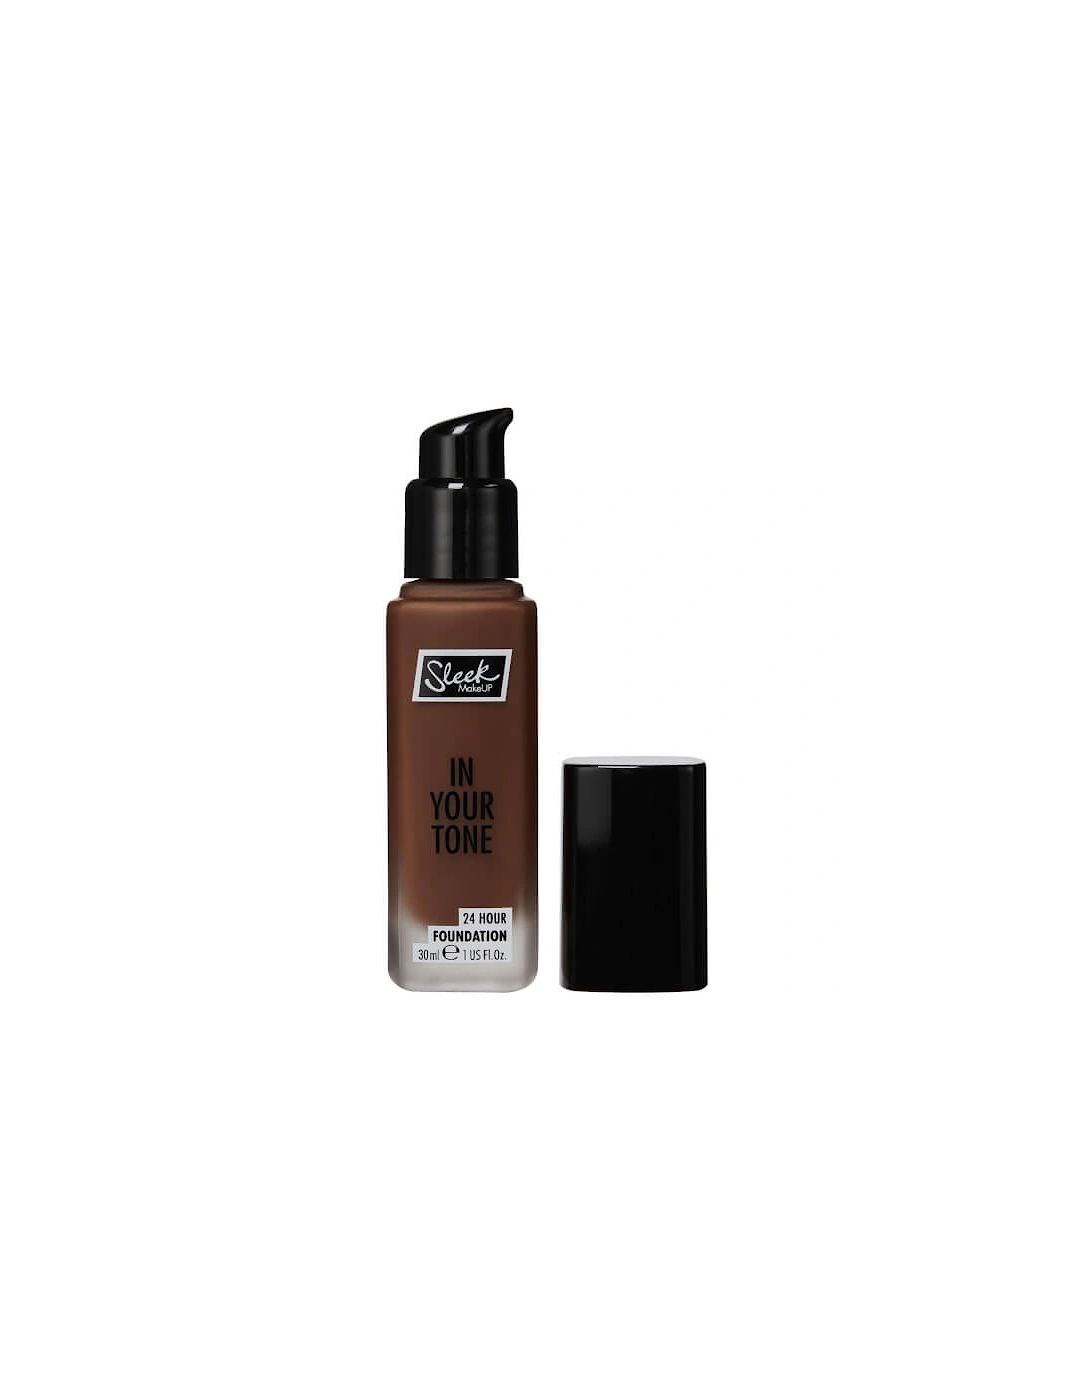 in Your Tone 24 Hour Foundation - 13N, 2 of 1